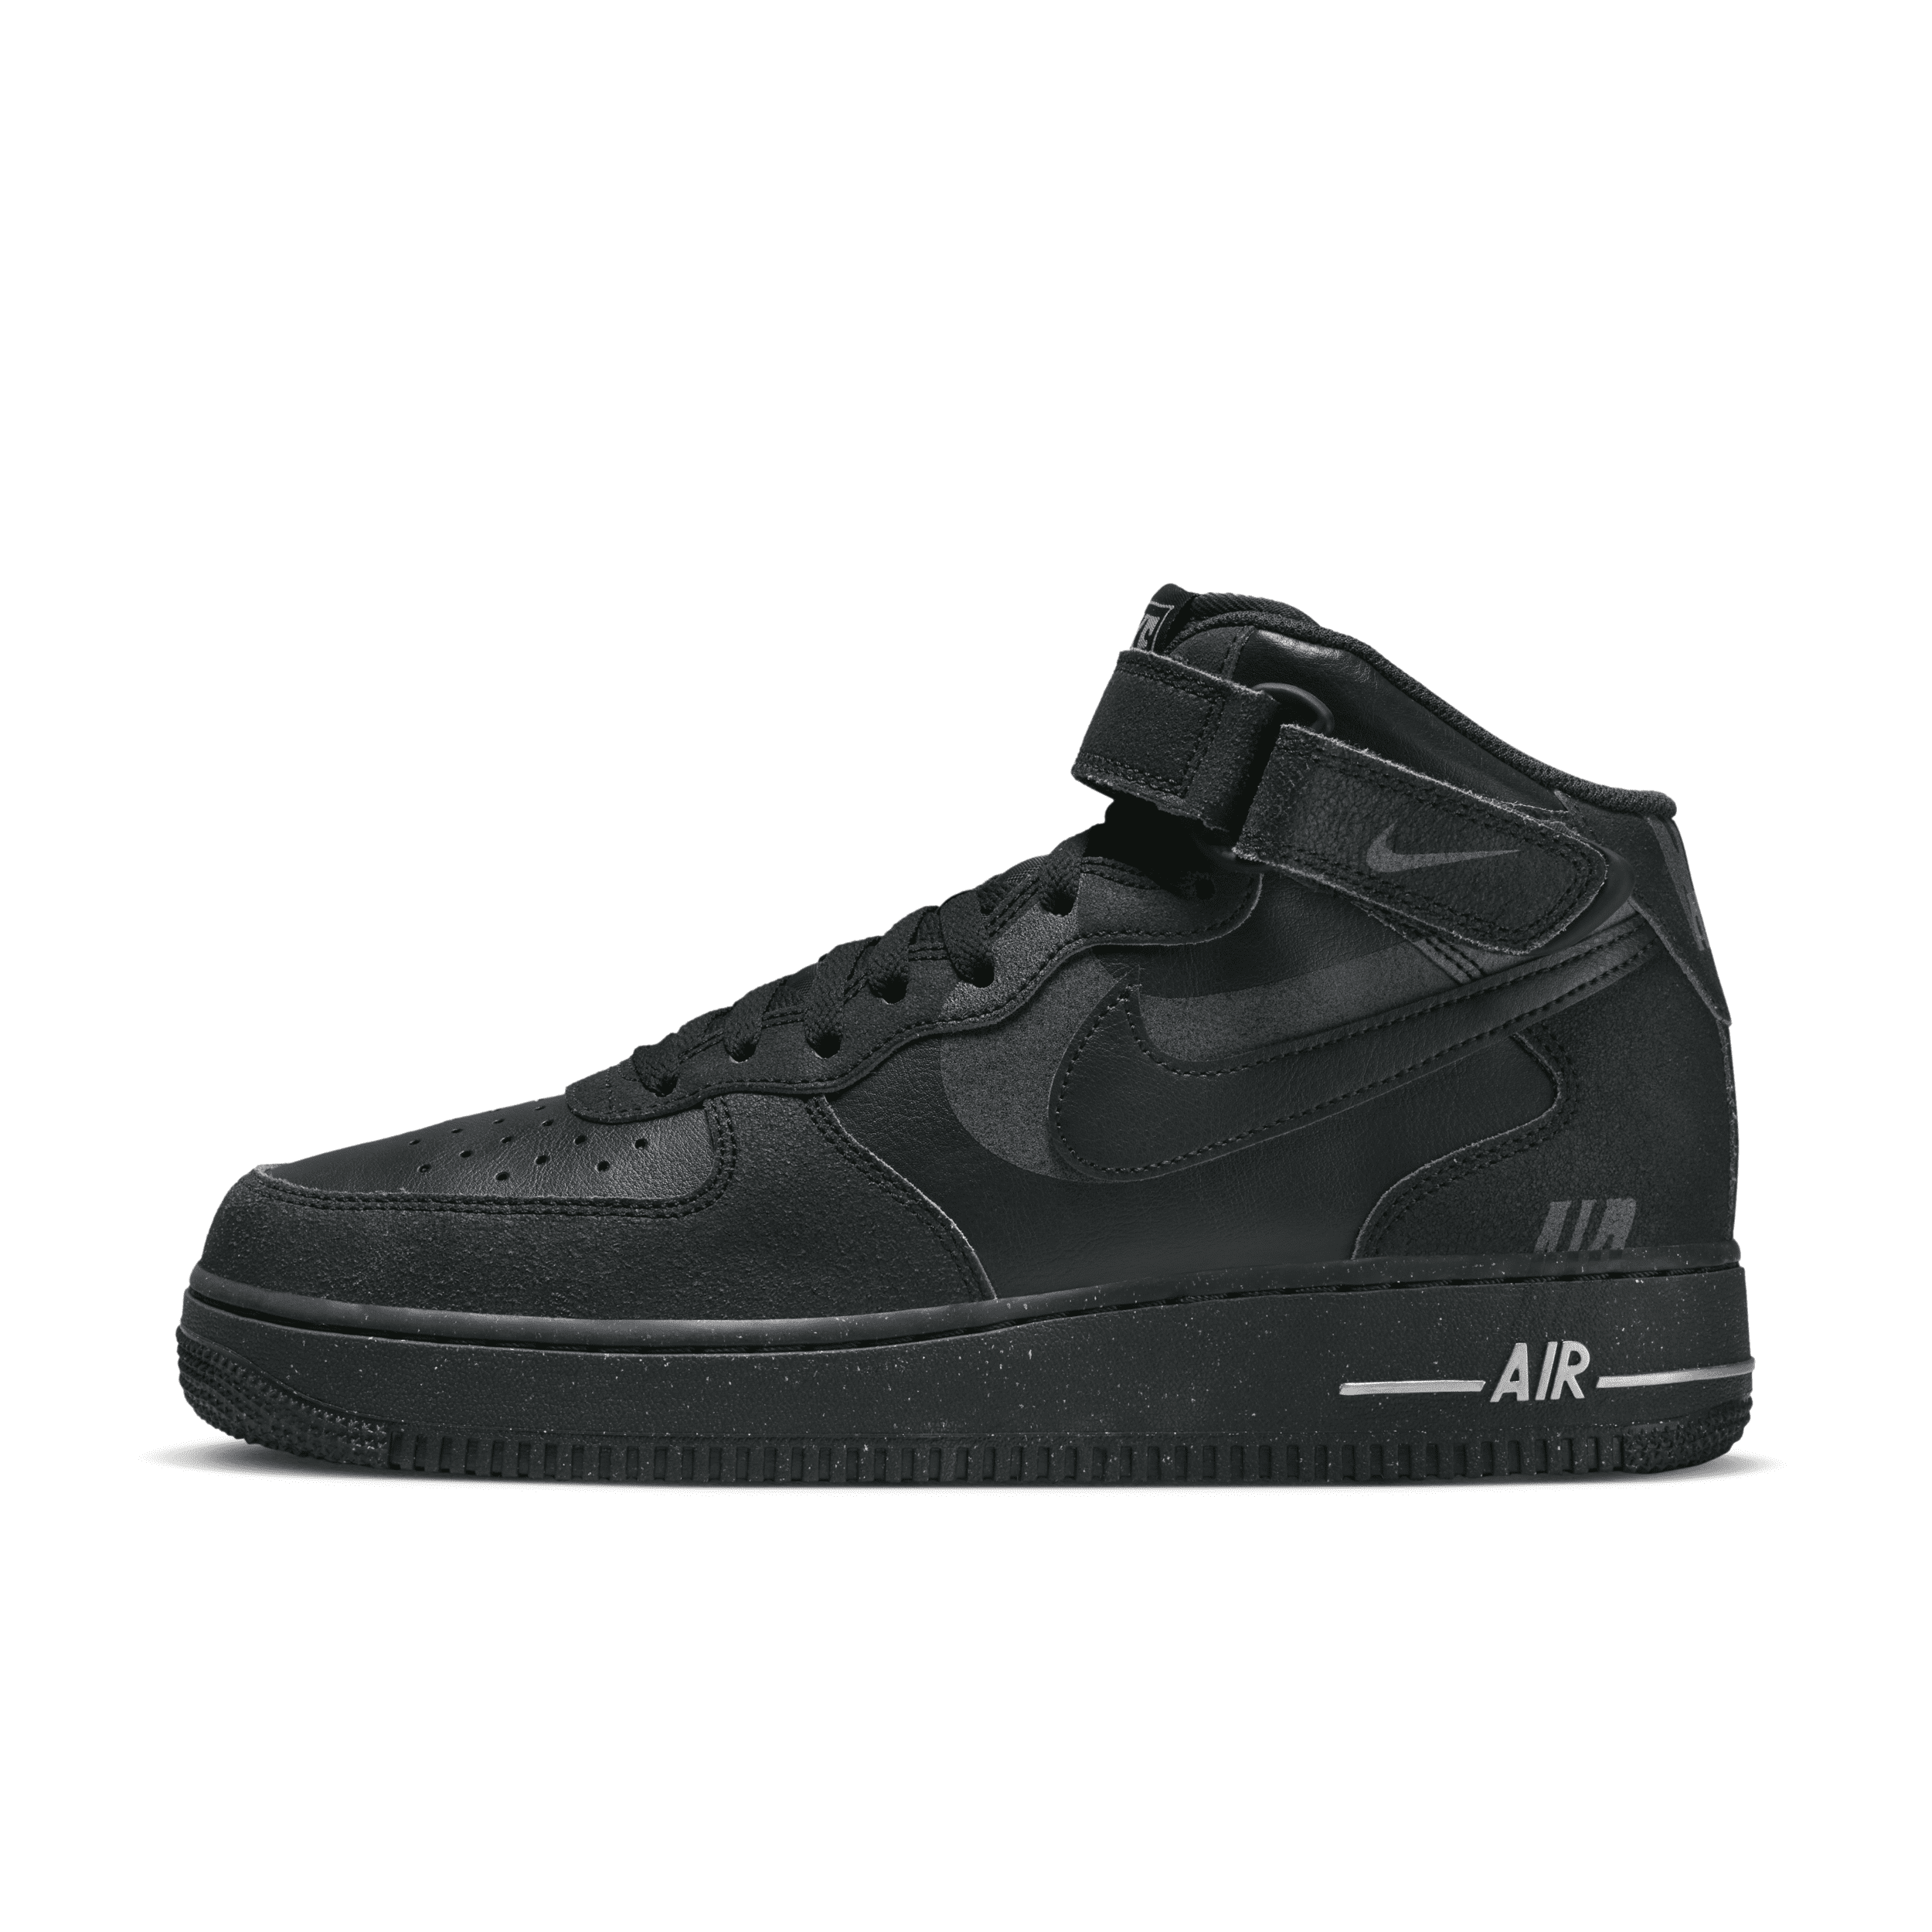 NIKE MEN'S AIR FORCE 1 MID '07 LX SHOES,14244632